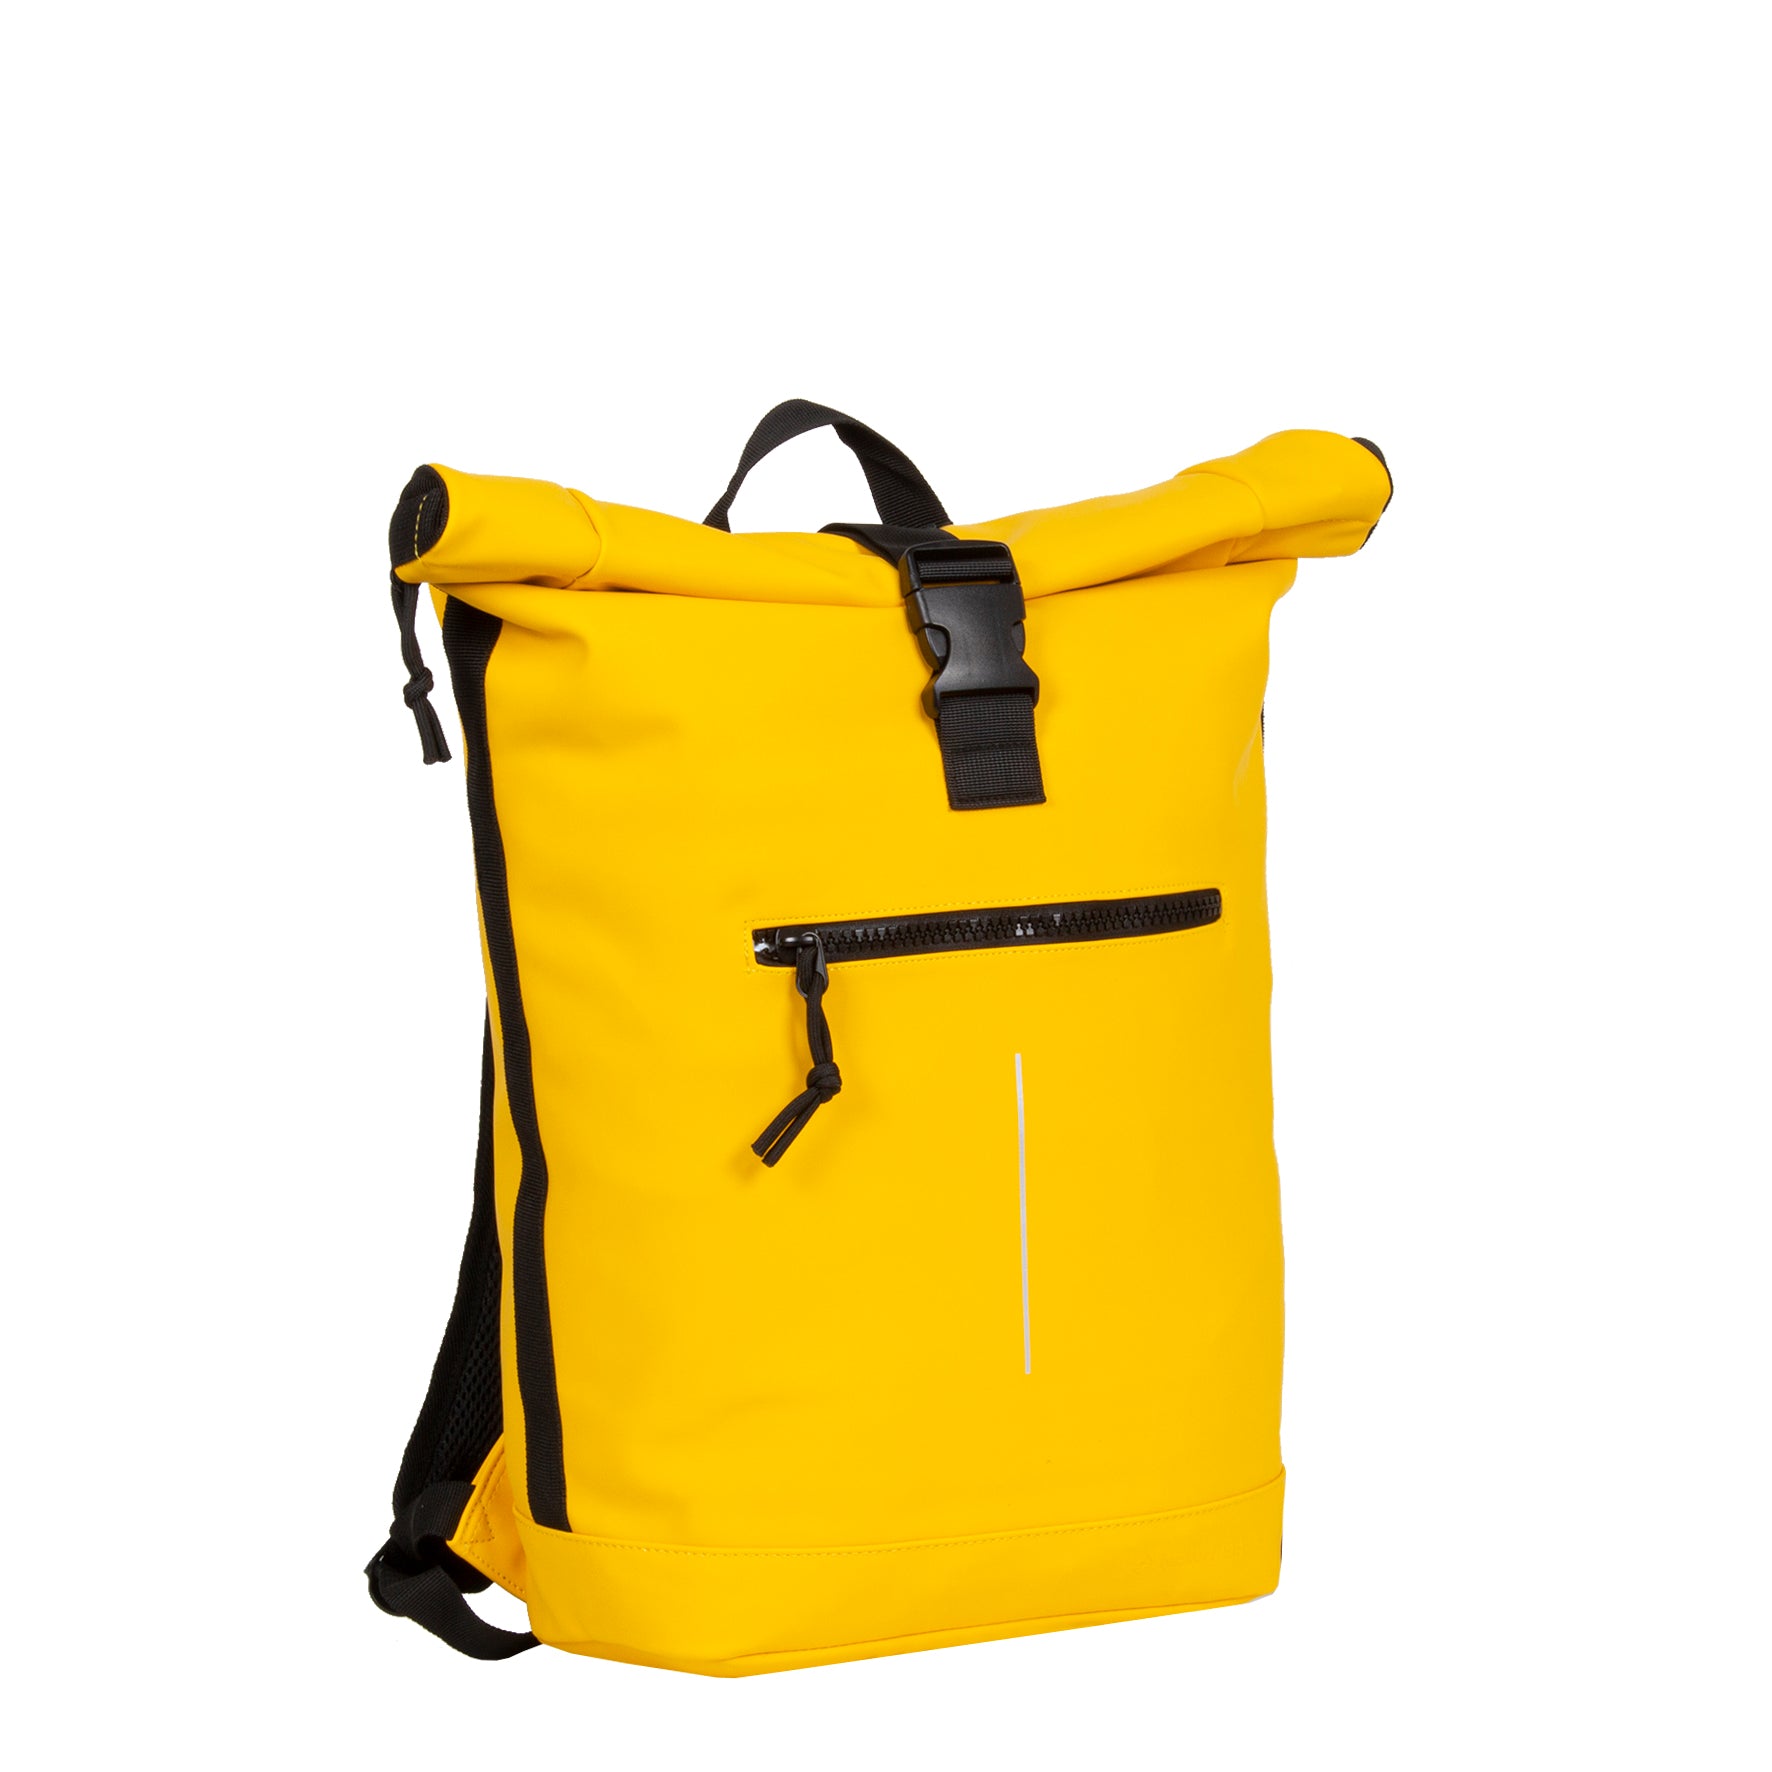 New Rebels Mart  New York Rolltop Backpack 16L Yellow